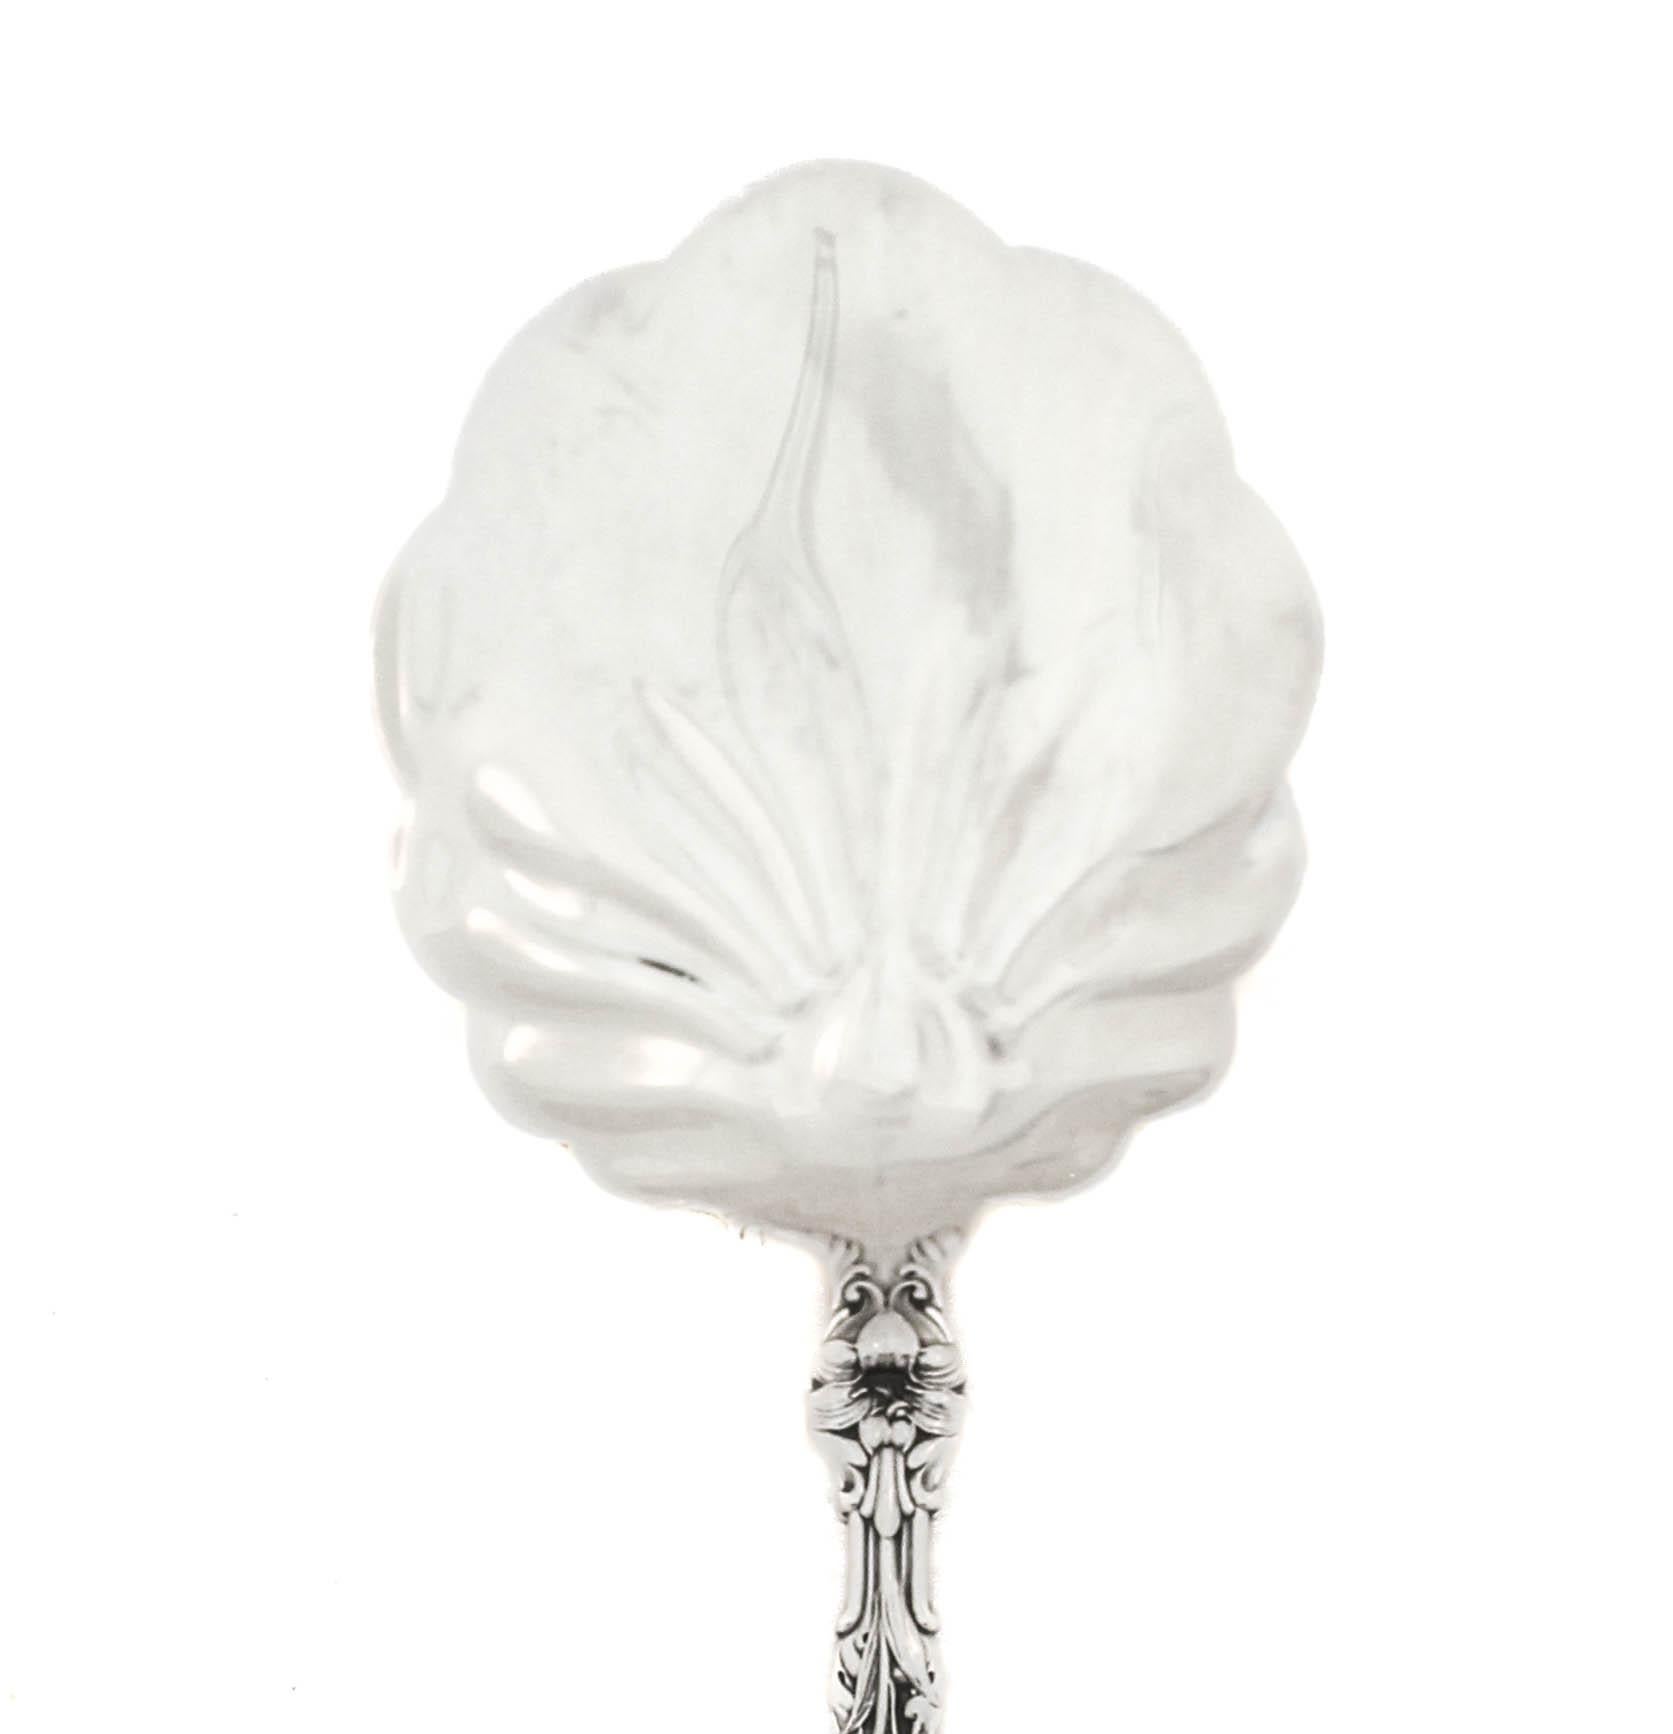 Being offered is a sterling silver serving piece by Gorham Silversmiths in the “Lily” pattern.  First introduced in 1910, “Lily” aka “Floral” quickly became a favorite among silver collectors.  Its Art Nouveau style was well received and Lily